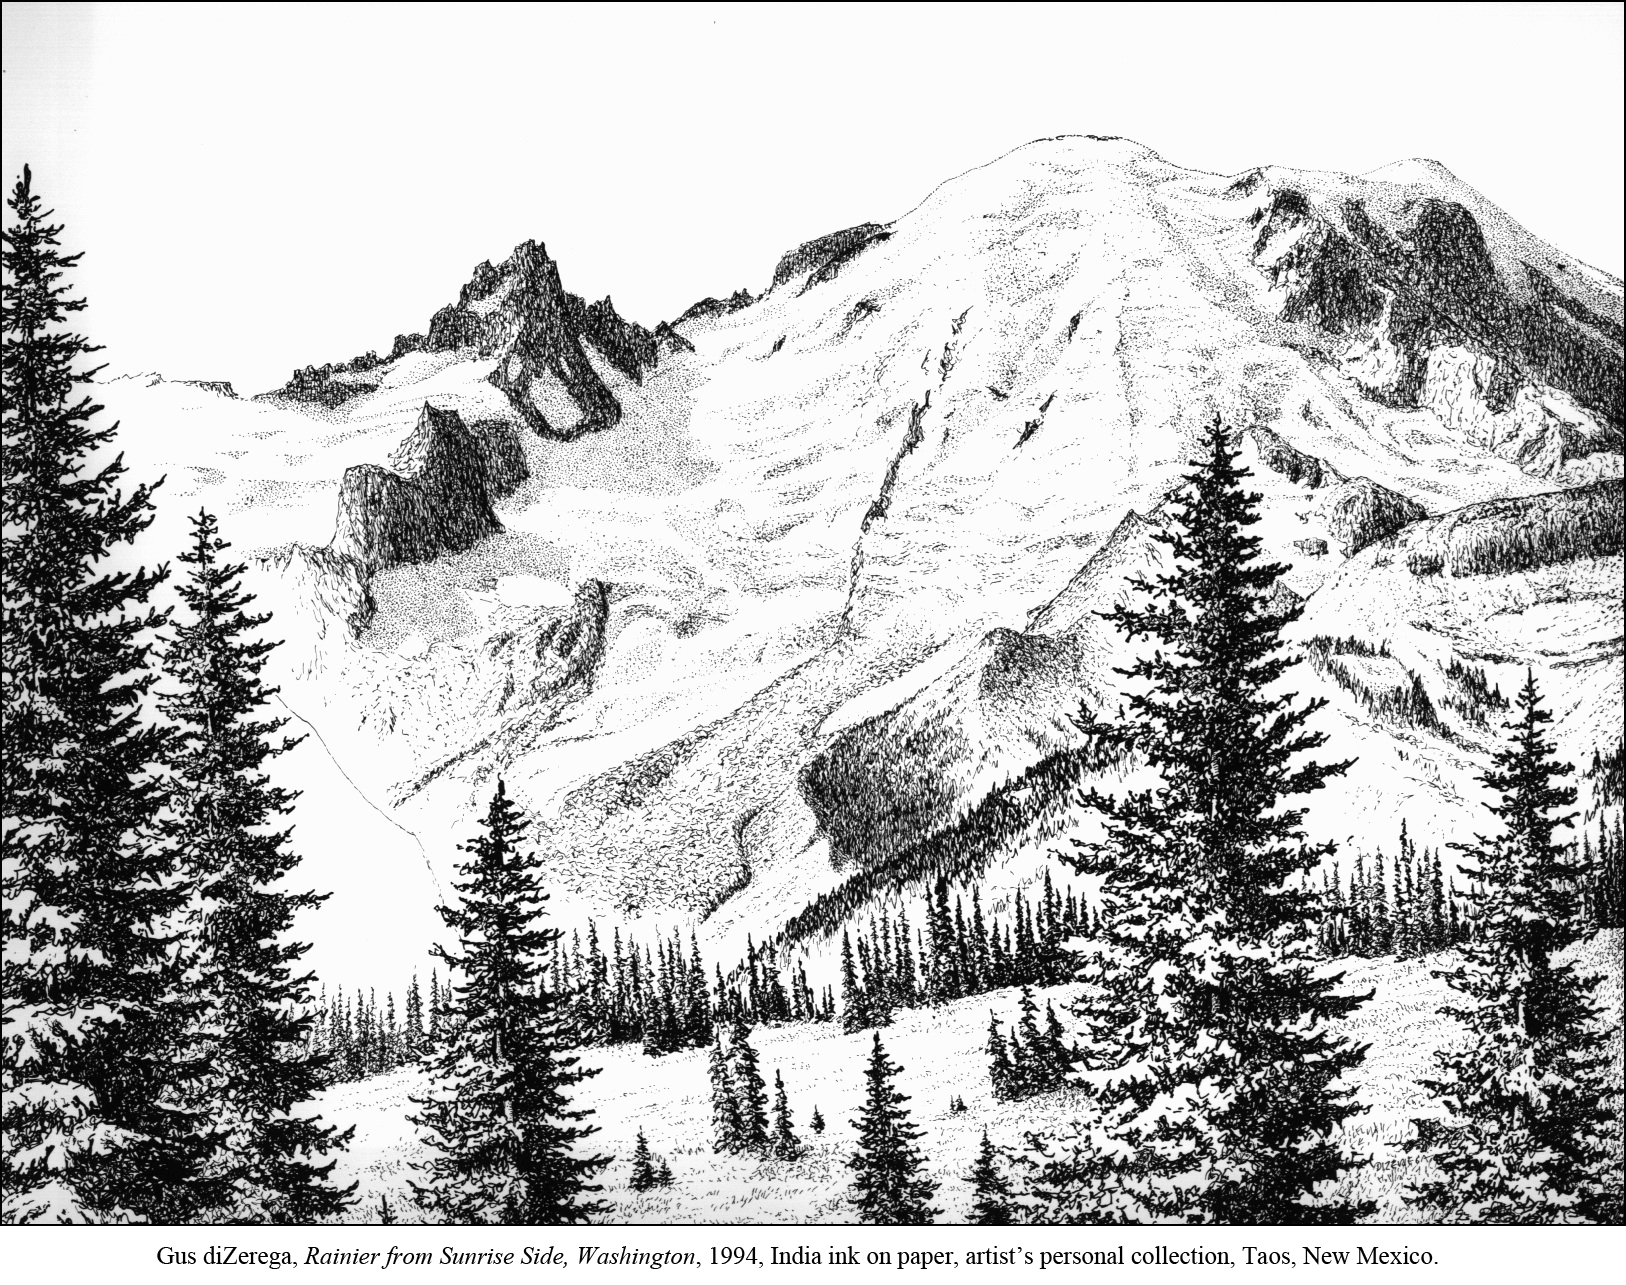 black and white drawing of Mount Rainier with evergreen trees in foreground; citation: Gus diZerega, Rainier from Sunrise Side, Washington, 1994, India ink on paper, artist's personal collection, Taos, New Mexico.